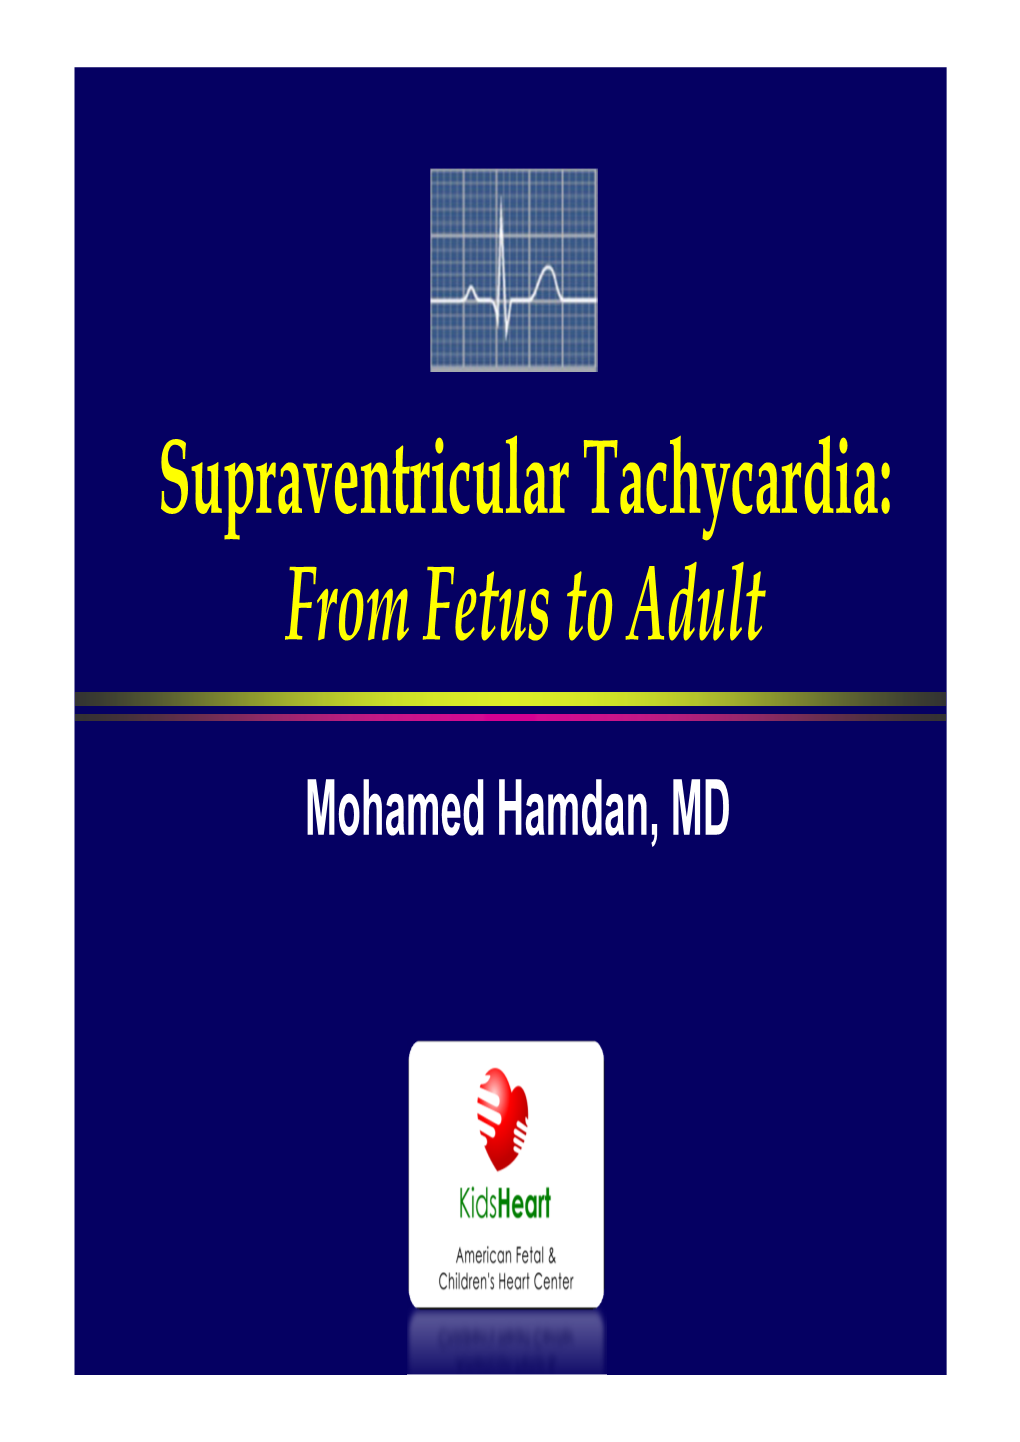 Supraventricular Tachycardia: from Fetus to Adult